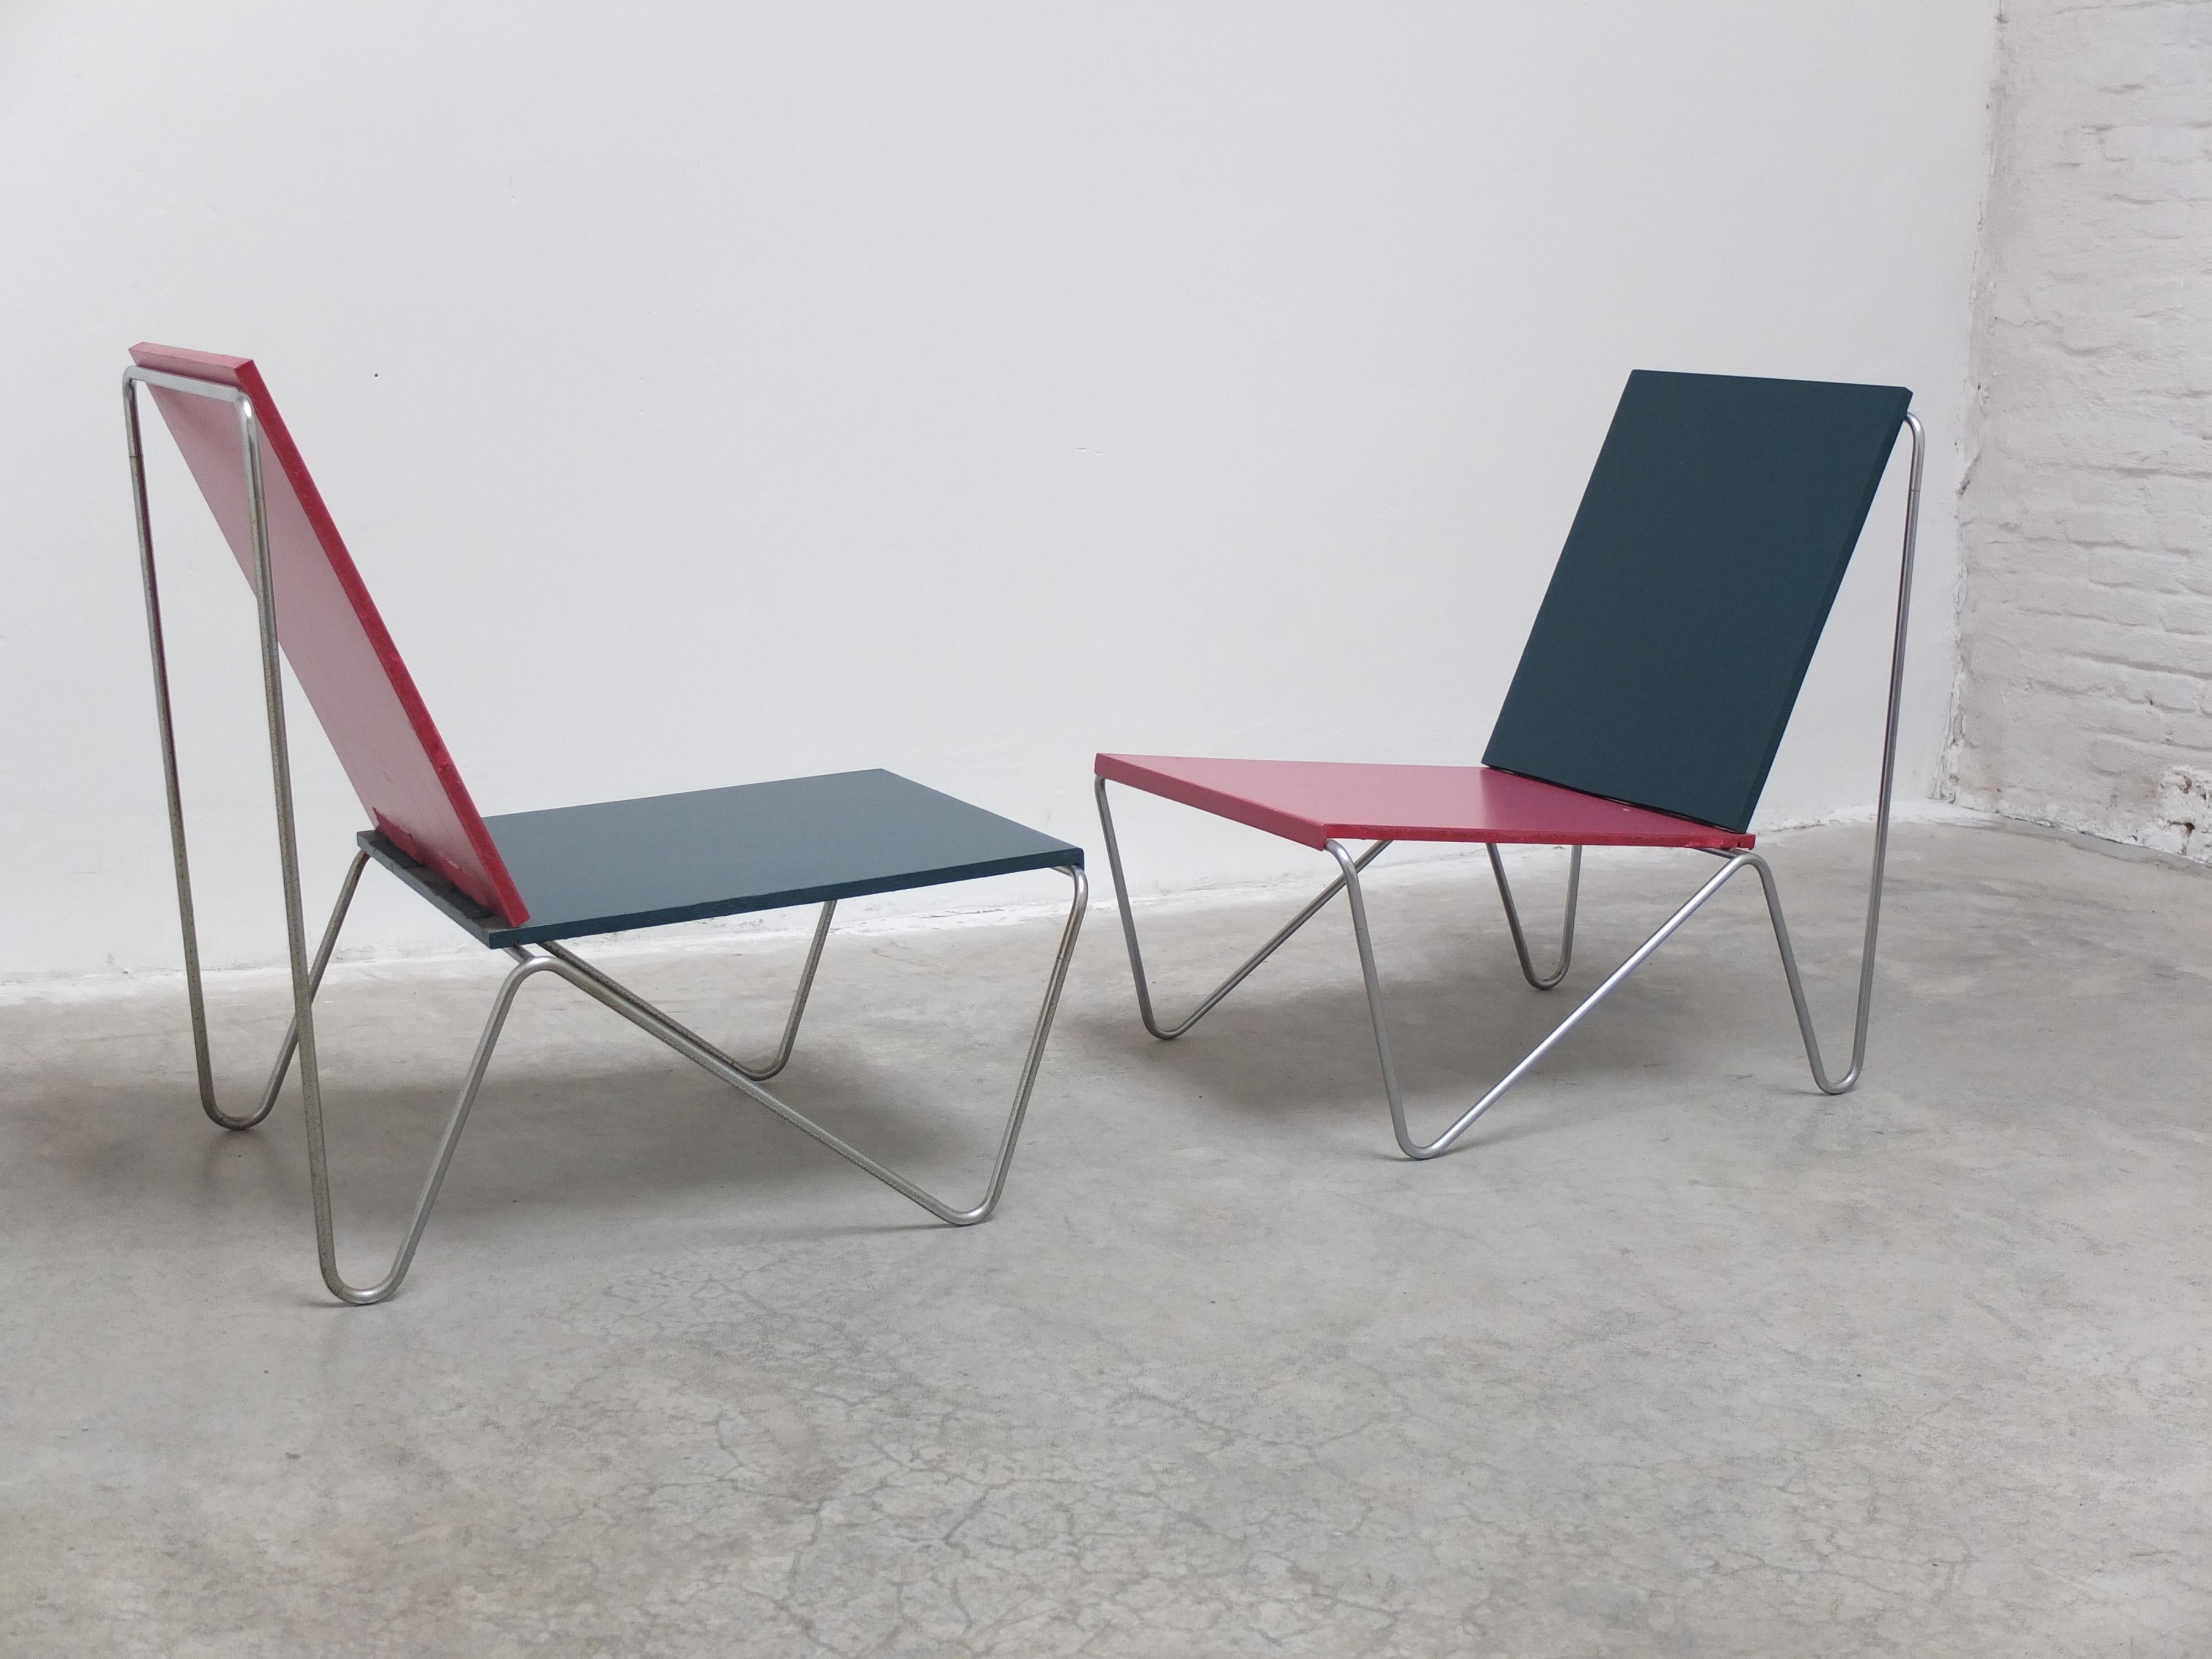 Unique Pair of 'Bachelor' Chairs by Verner Panton for Fritz Hansen, 1971 For Sale 9